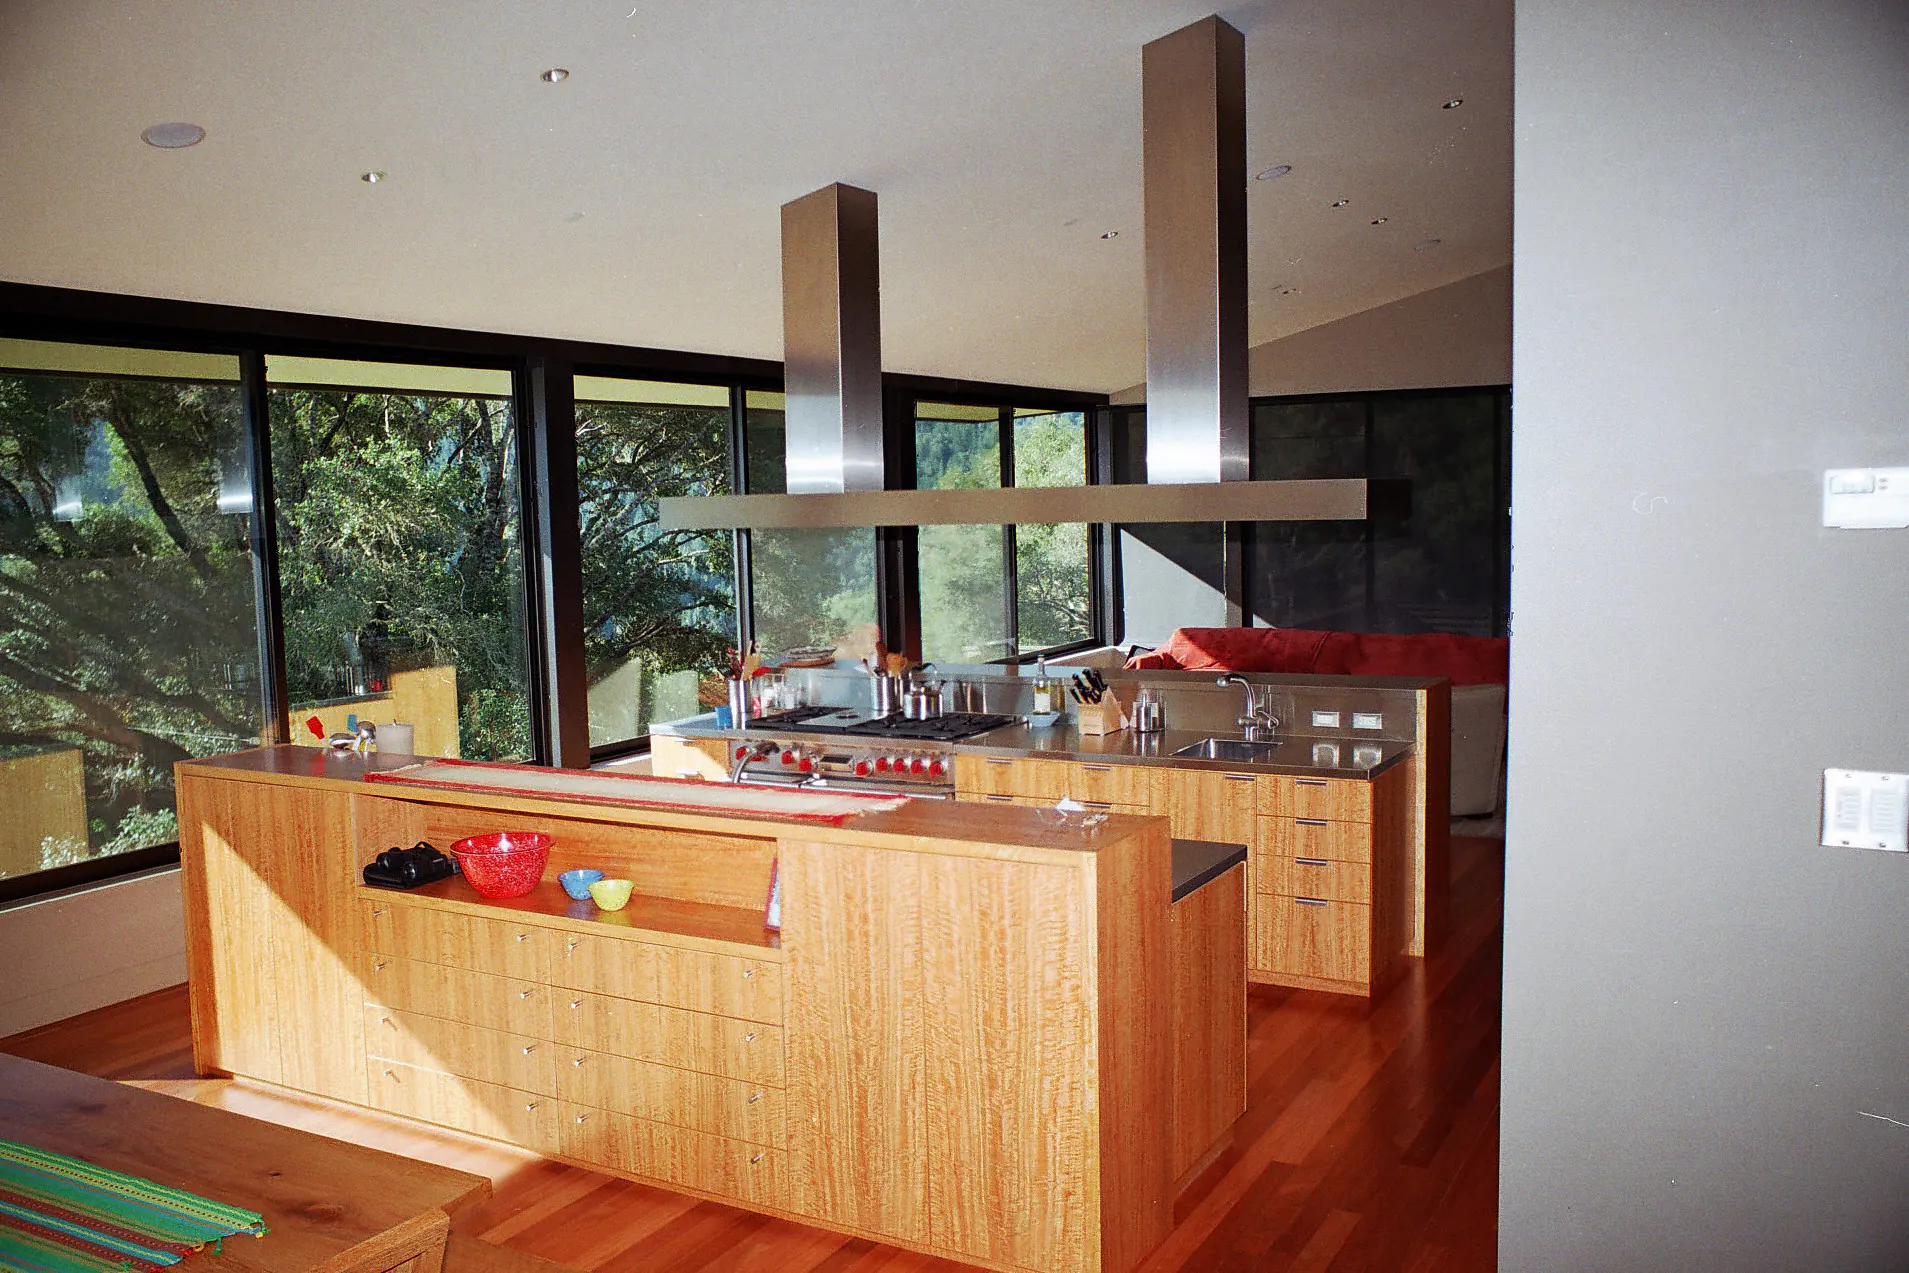 Photo of Barstow/Ensign Residence; architect, Regan Bice and Assoc., Berkeley, CA; kitchen